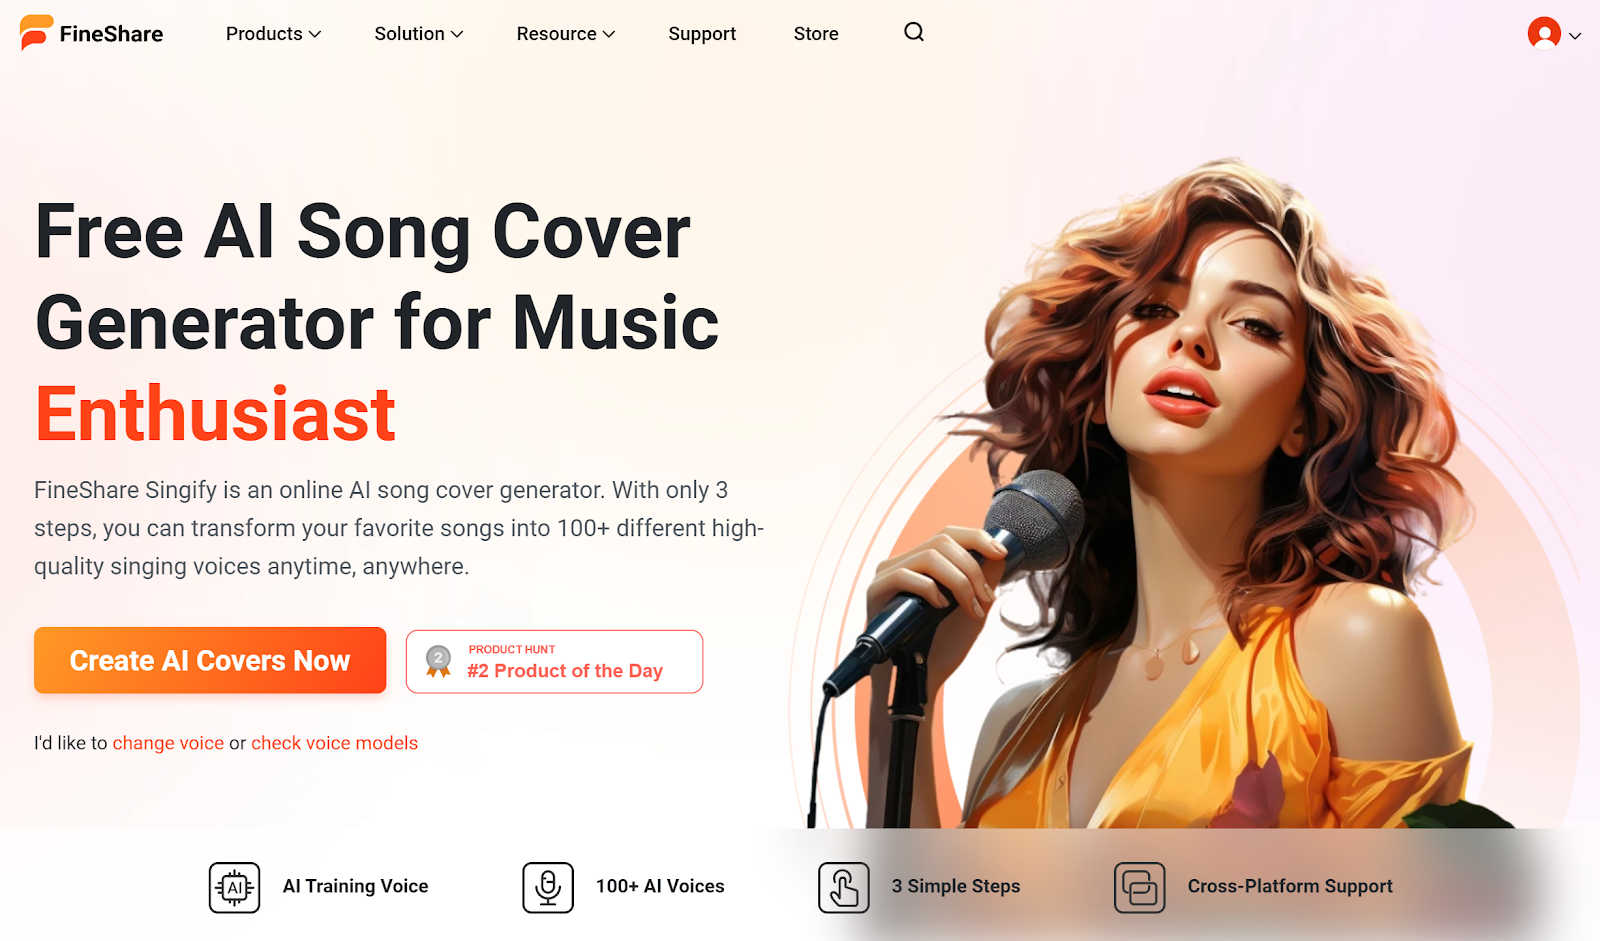 The FineShare Singify landing page.